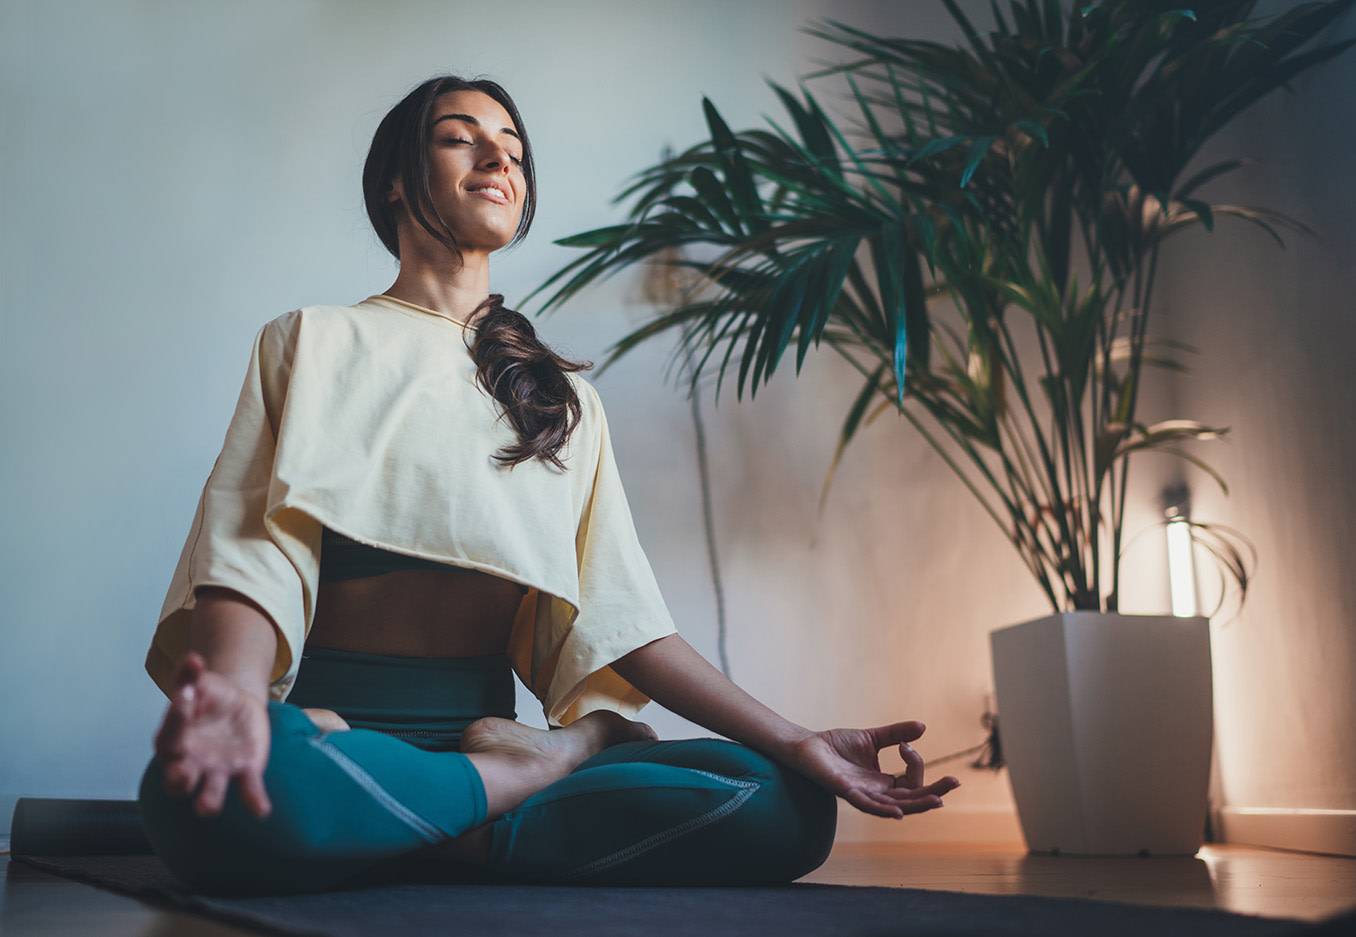 4 Yoga Audiobooks to Take Your Practice Off the Mat and into Your Soul